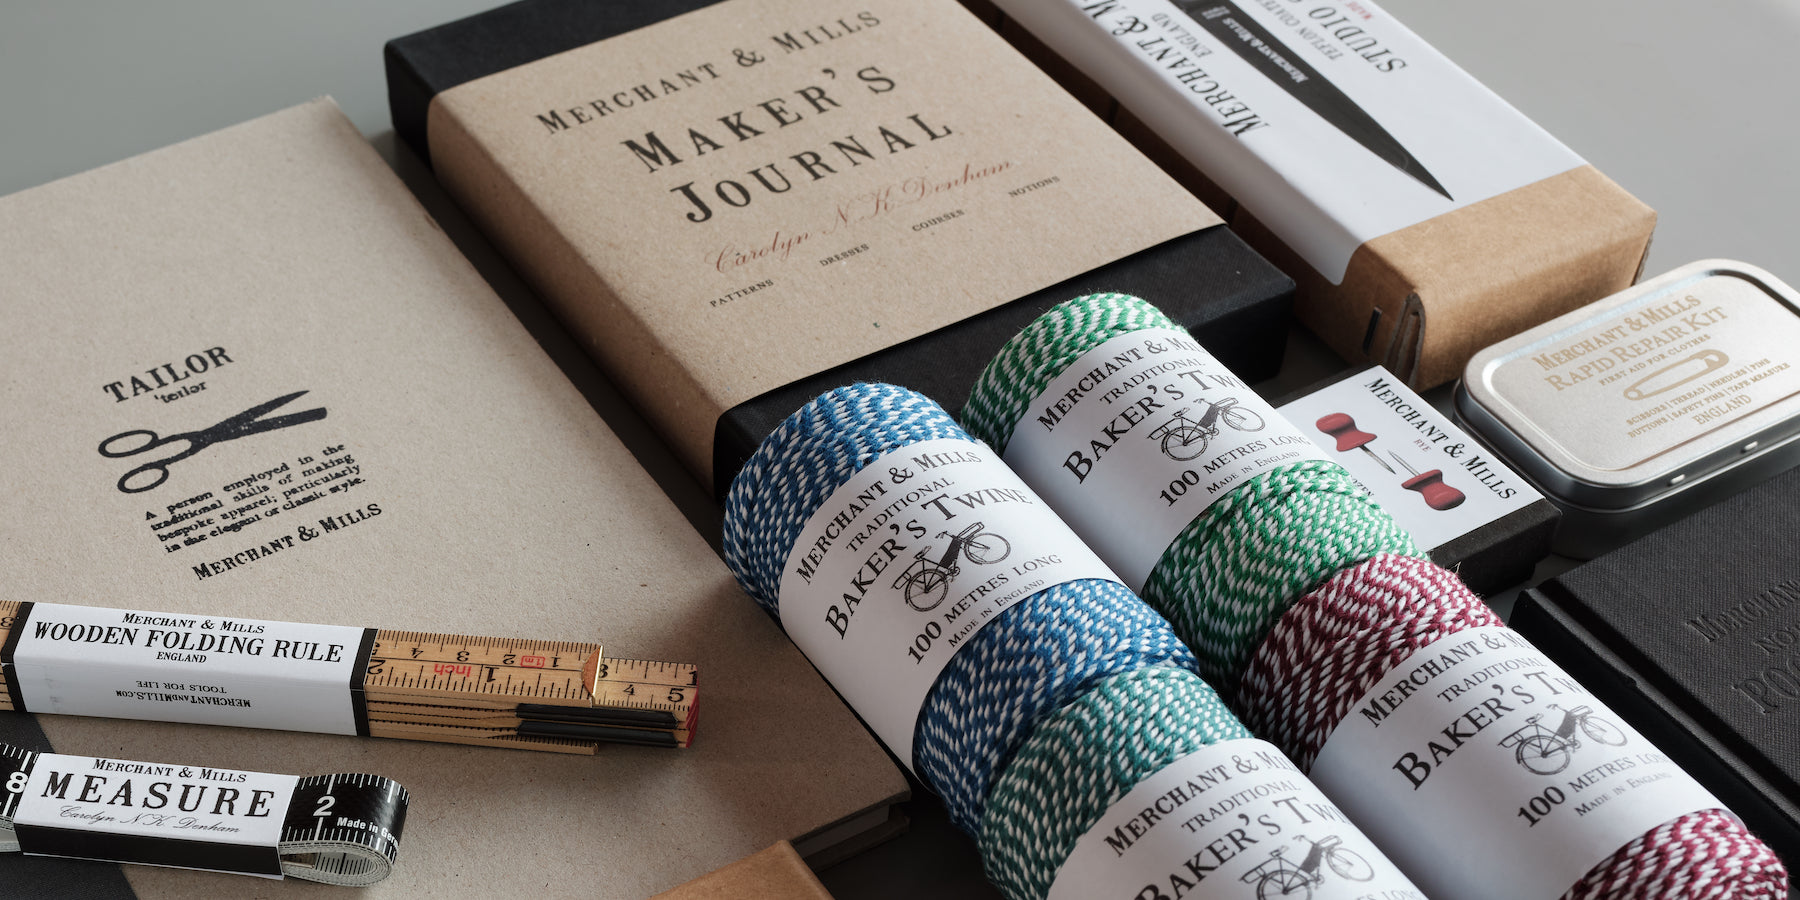 The Sewing Book by Merchant & Mills